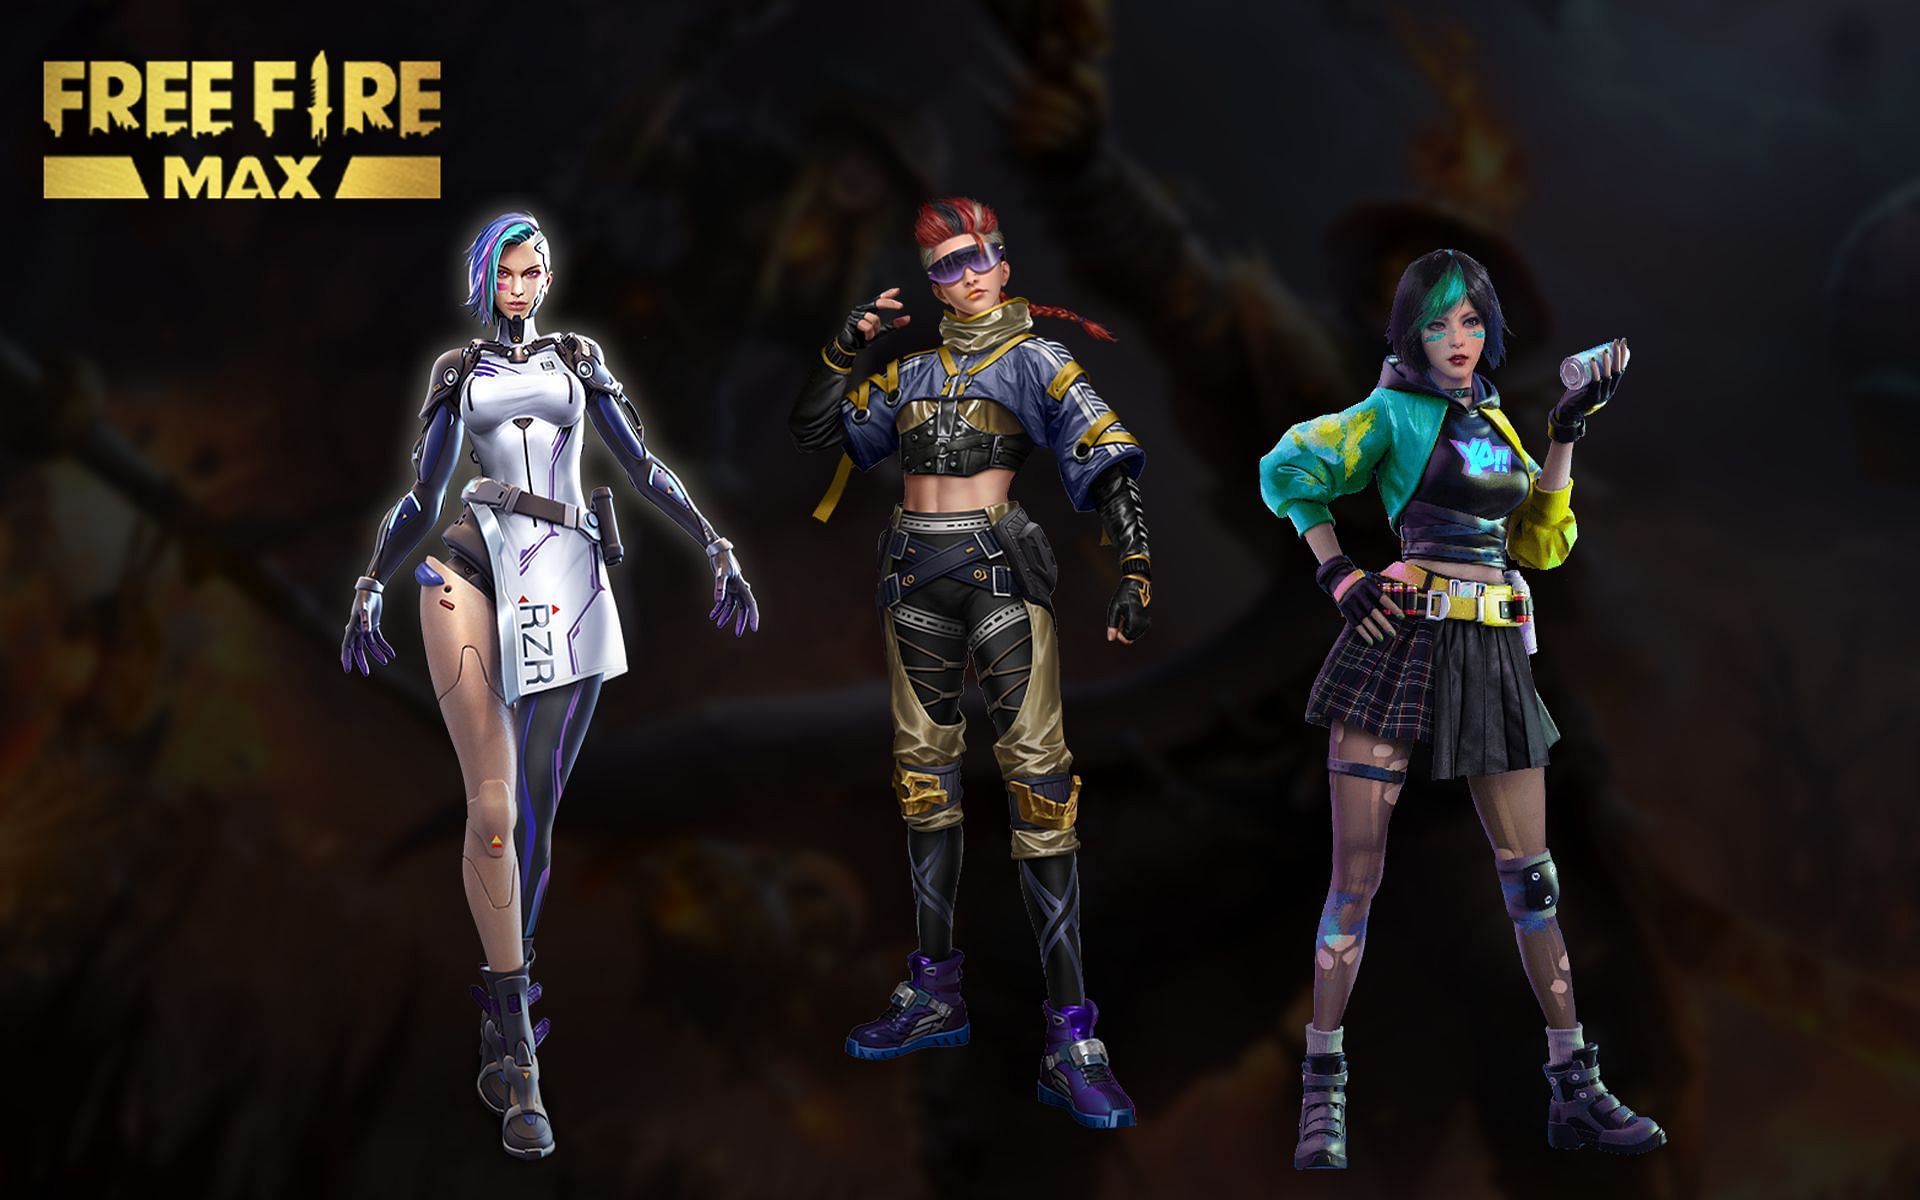 Free Fire MAX features a wide-character selection (Image via Sportskeeda)